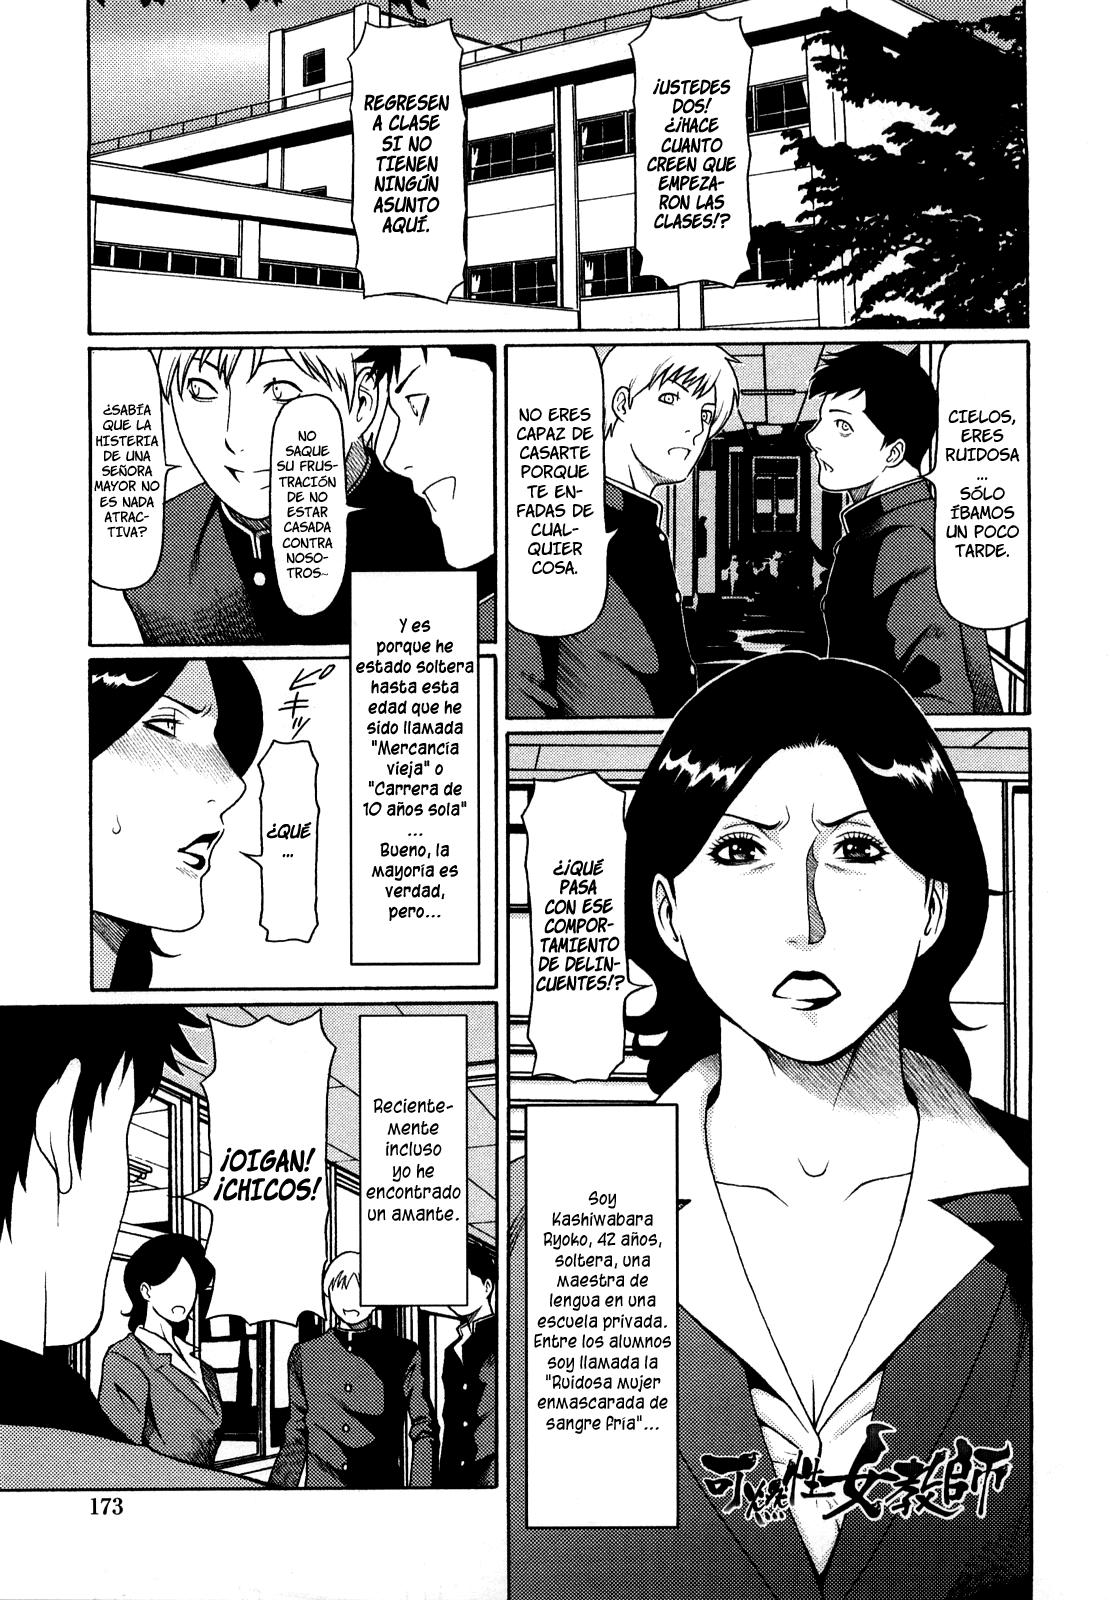 Immorality Love-Hole Completo (Sin Censura) Chapter-11 - 0